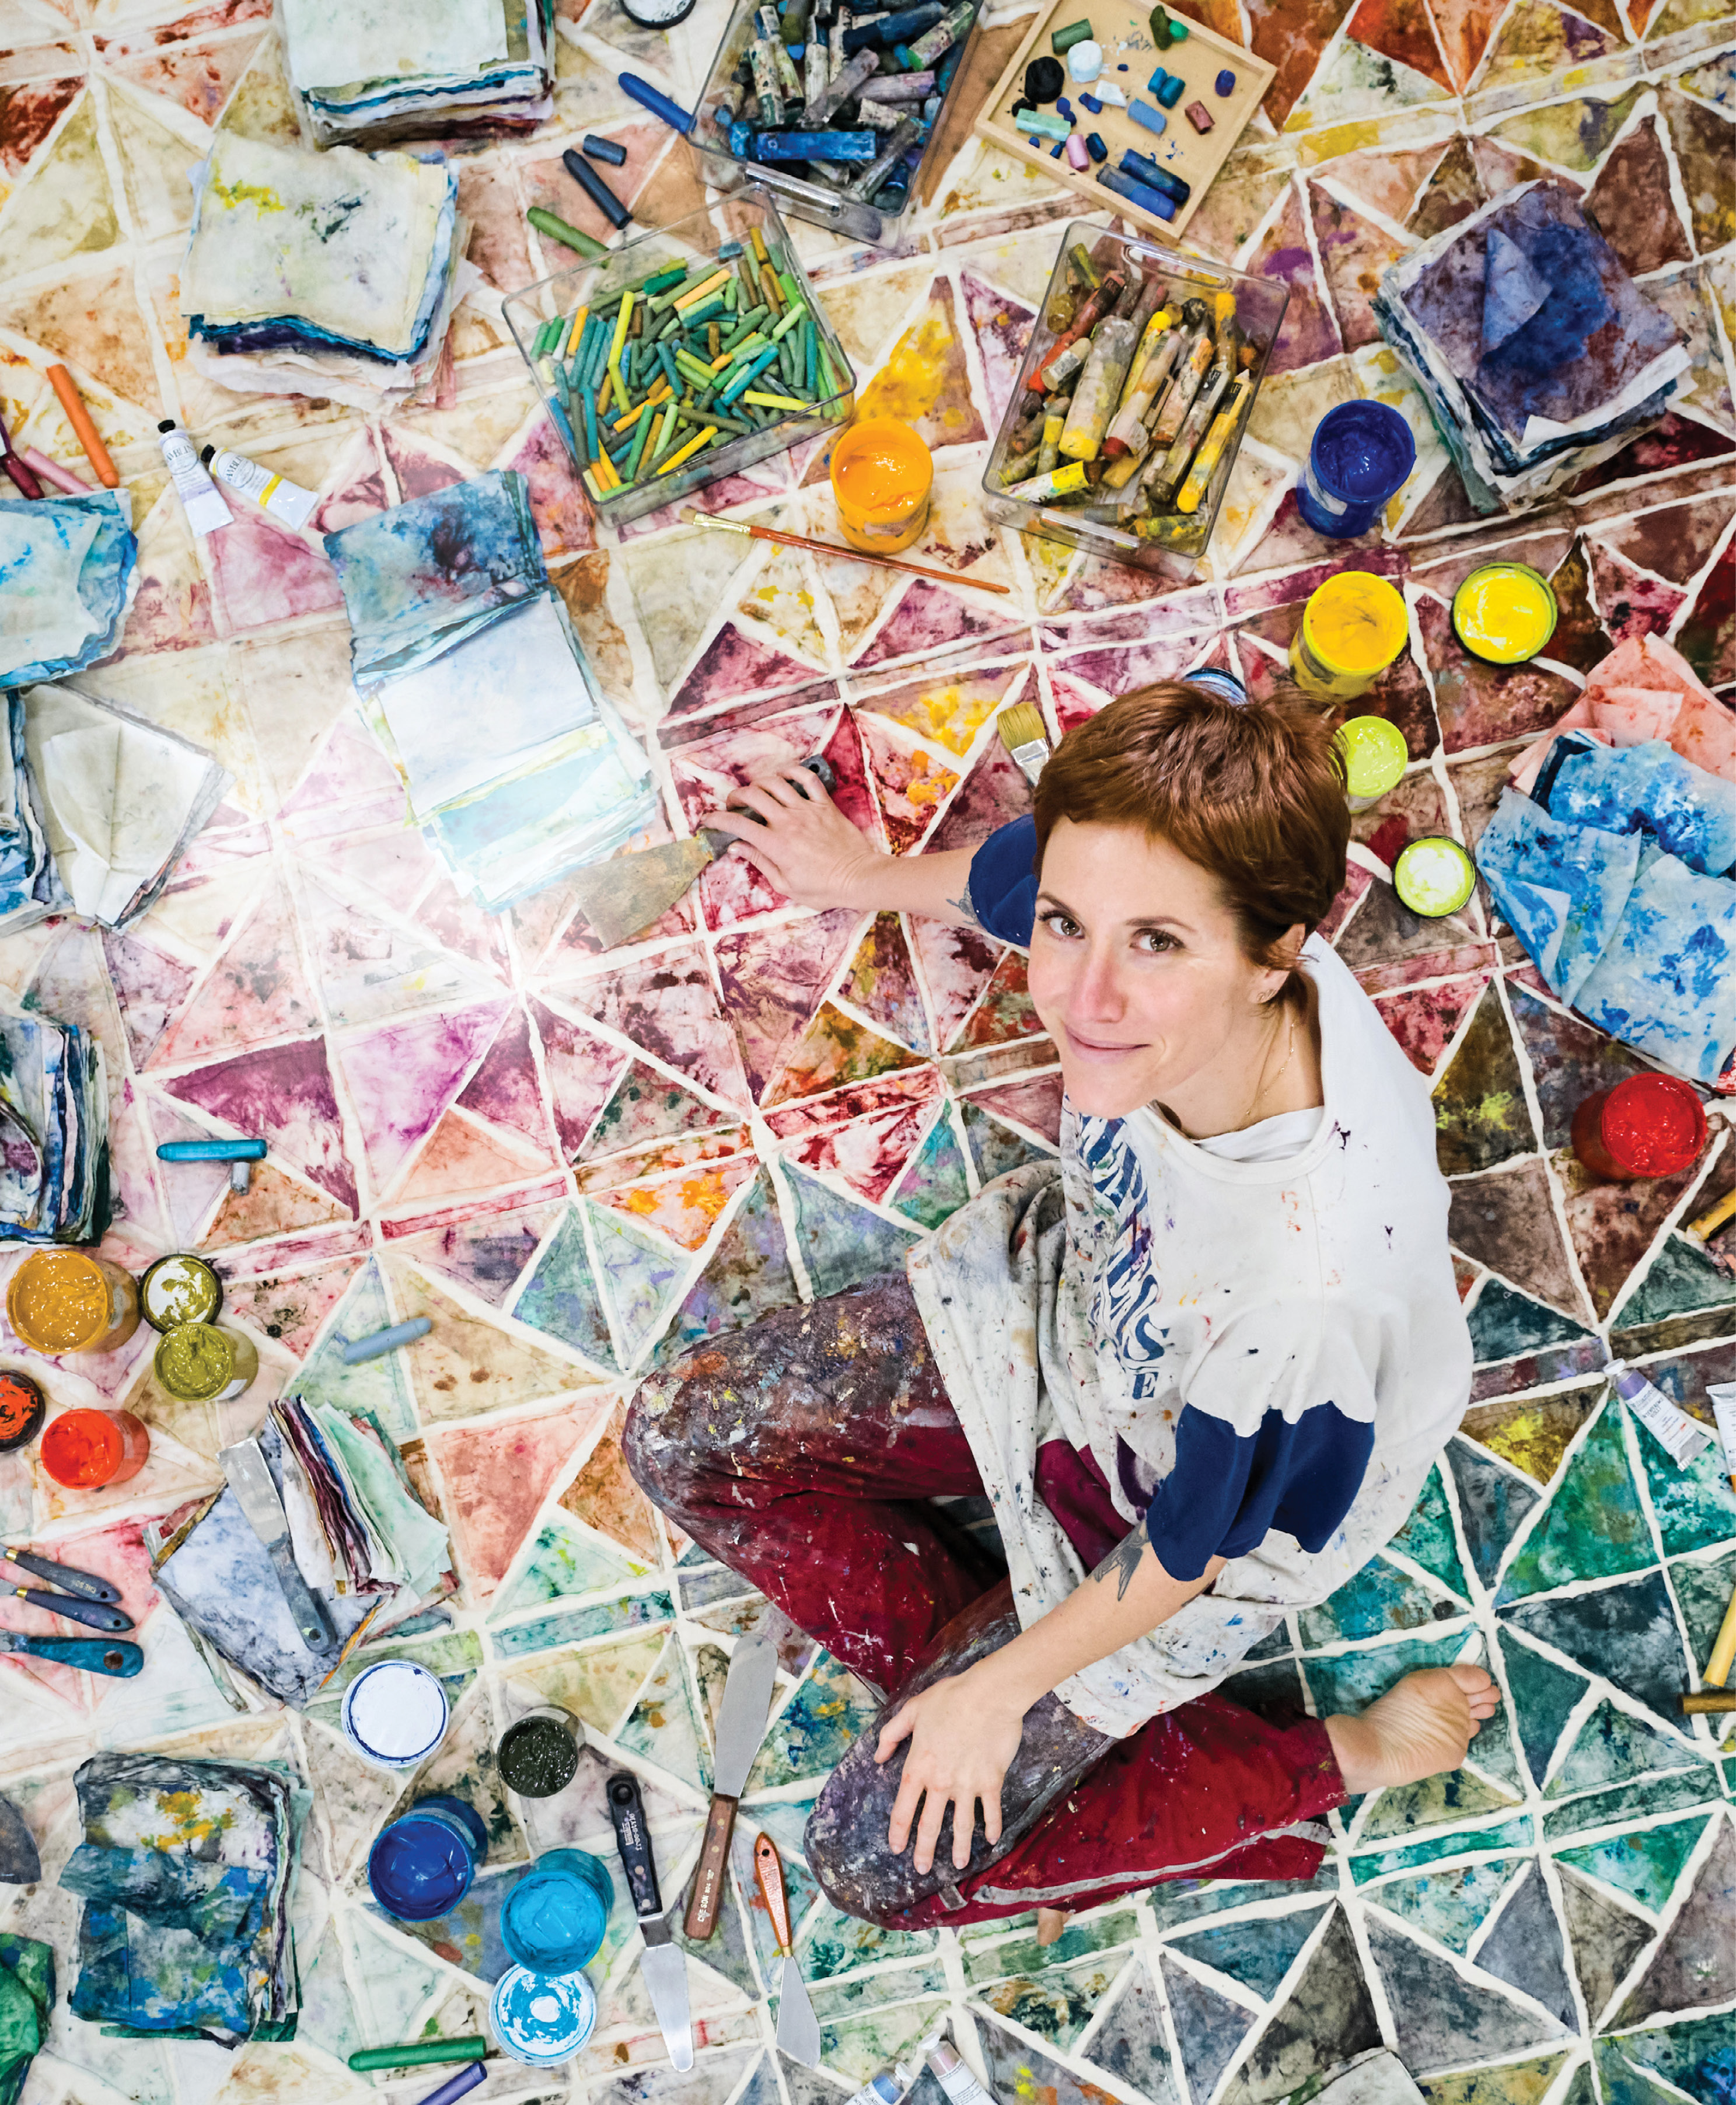 In an effort to make her studio more sustainable, painter Katy Mixon started reusing the paint-stained rags she was throwing away to create colorful quilts, such as The rain bows and the rainbows (one day we will switch sides), which she is sitting on here.